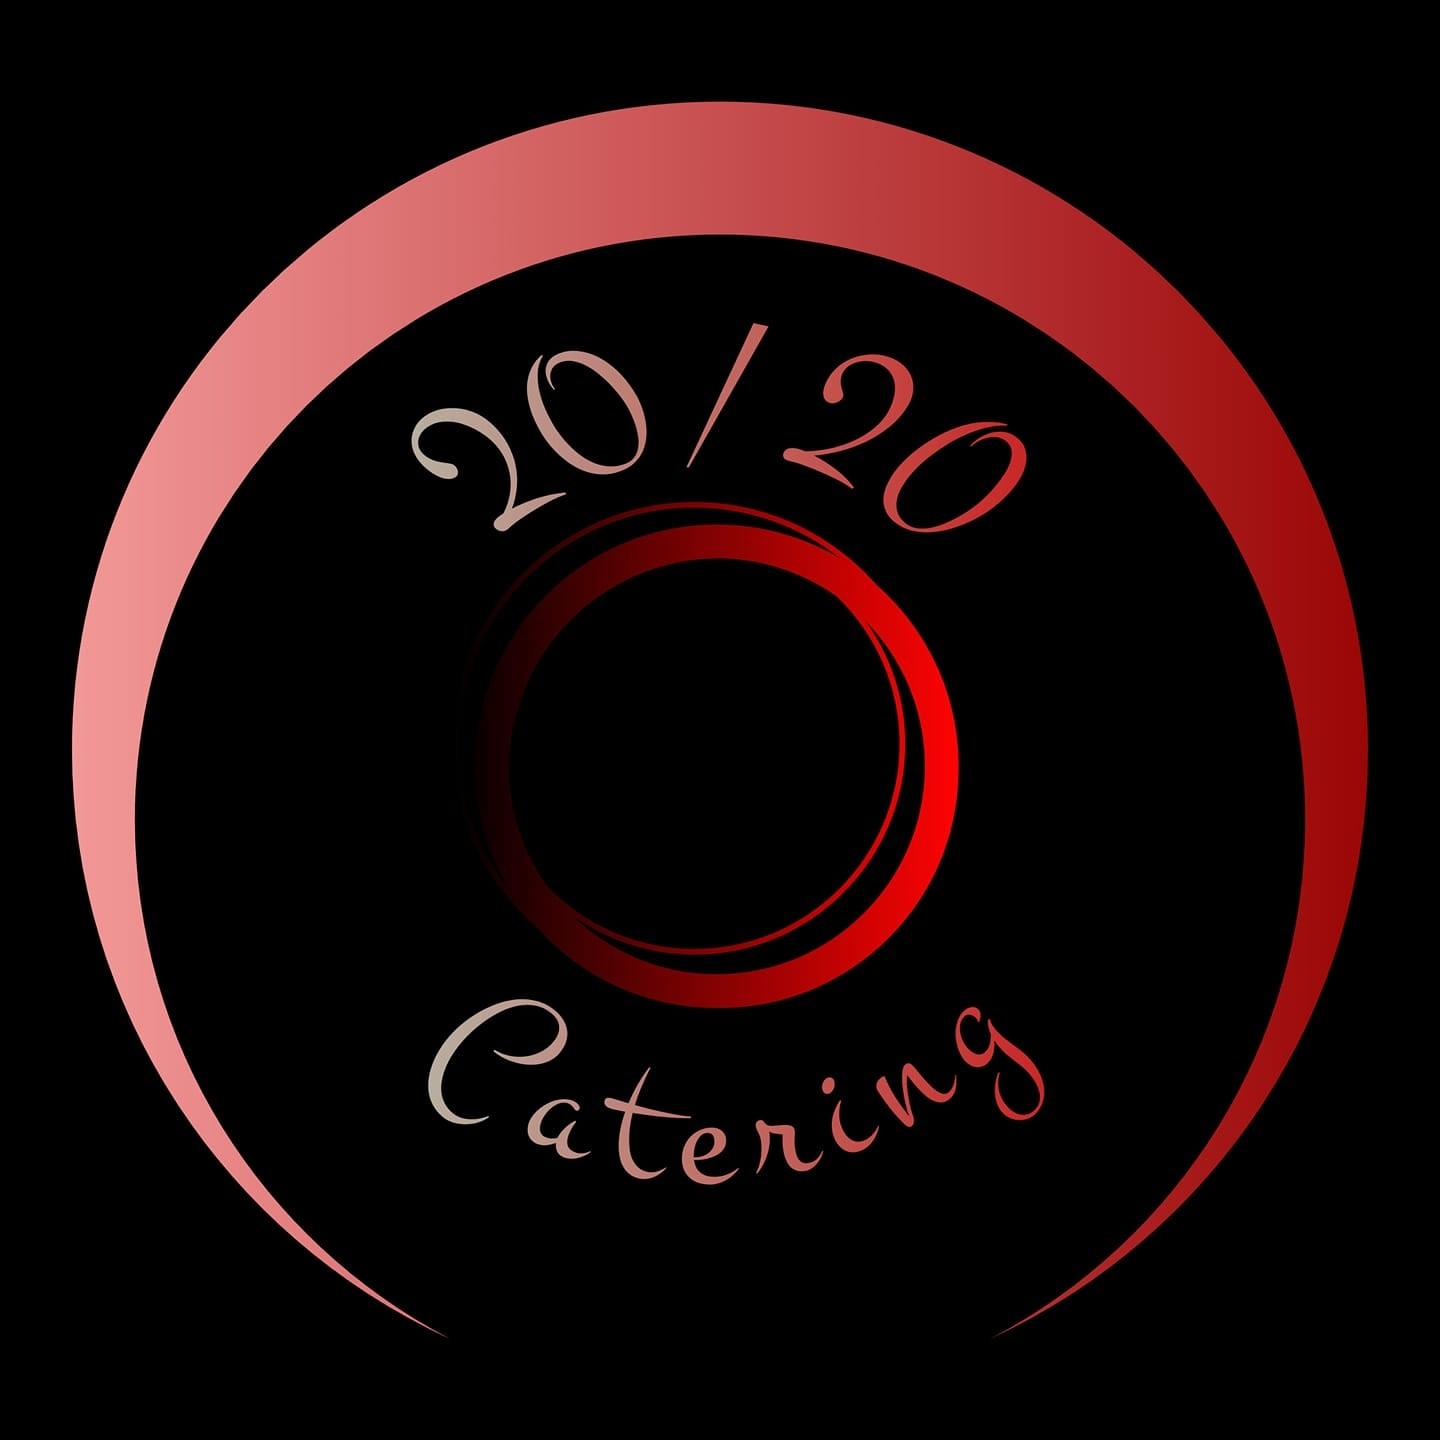 20/20 Bistro and Catering